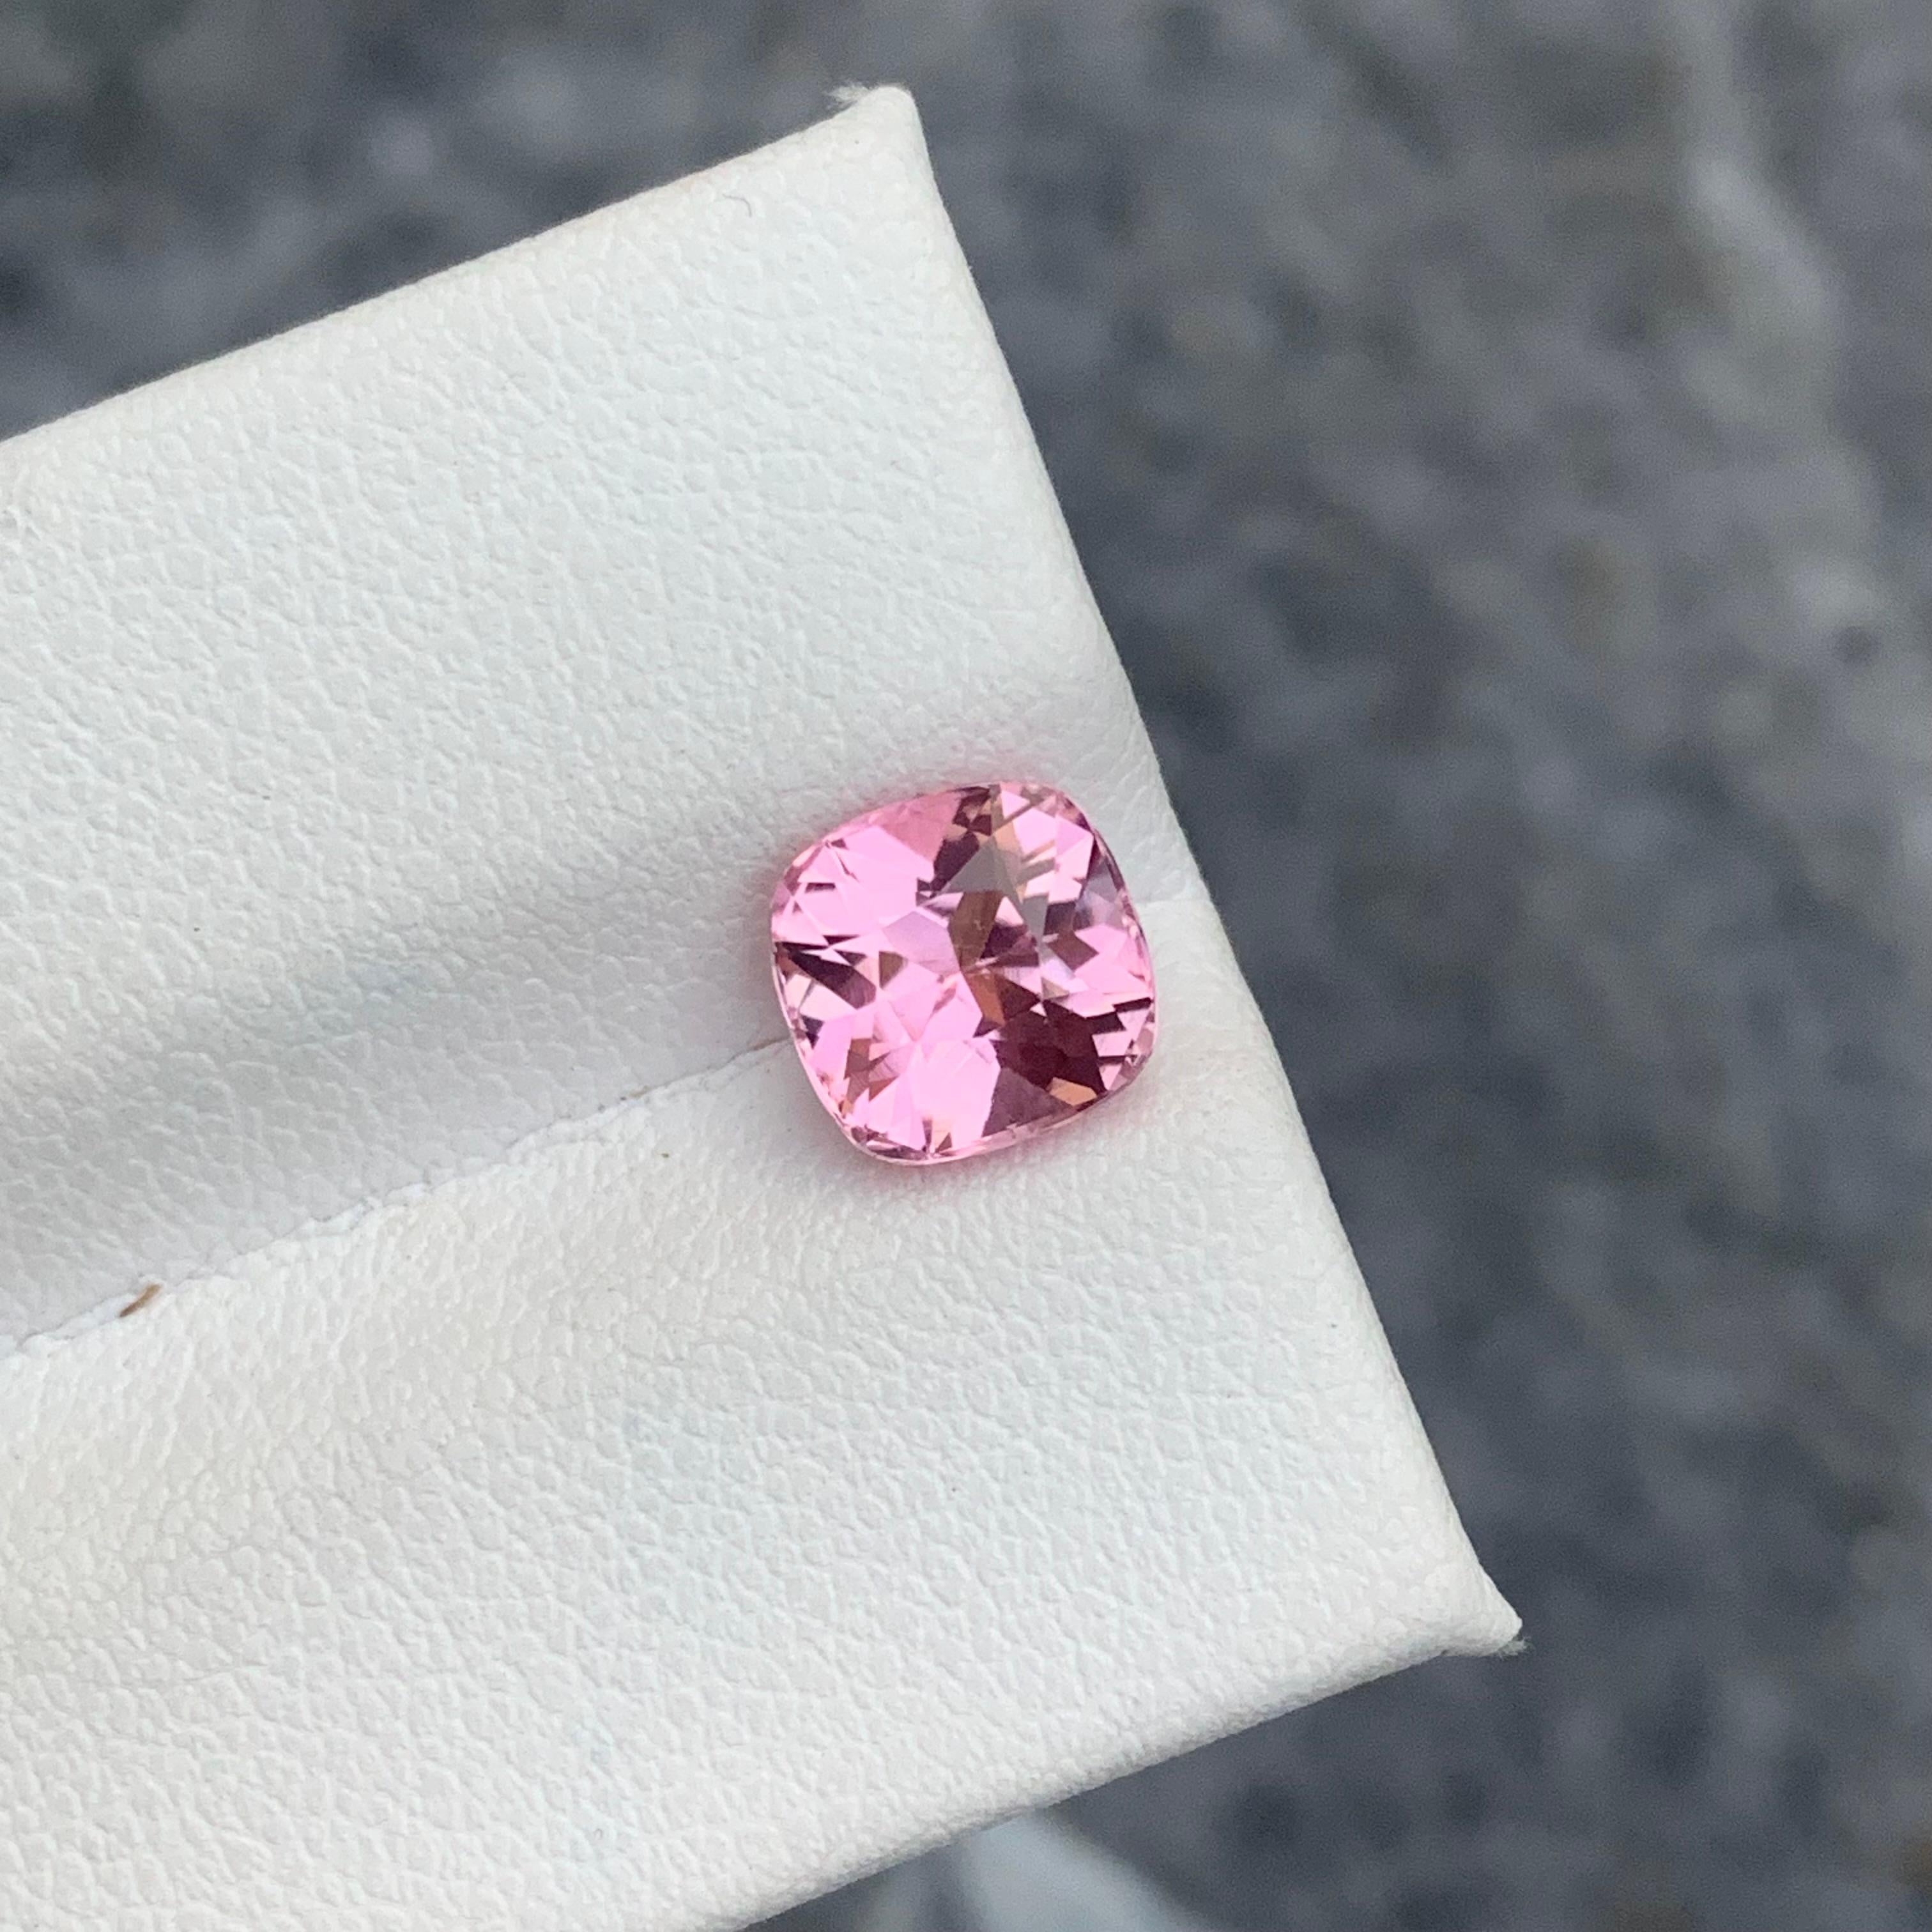 Women's or Men's Exceptional 2.0 Carat Natural Loose Baby Pink Tourmaline from Afghan Mine For Sale